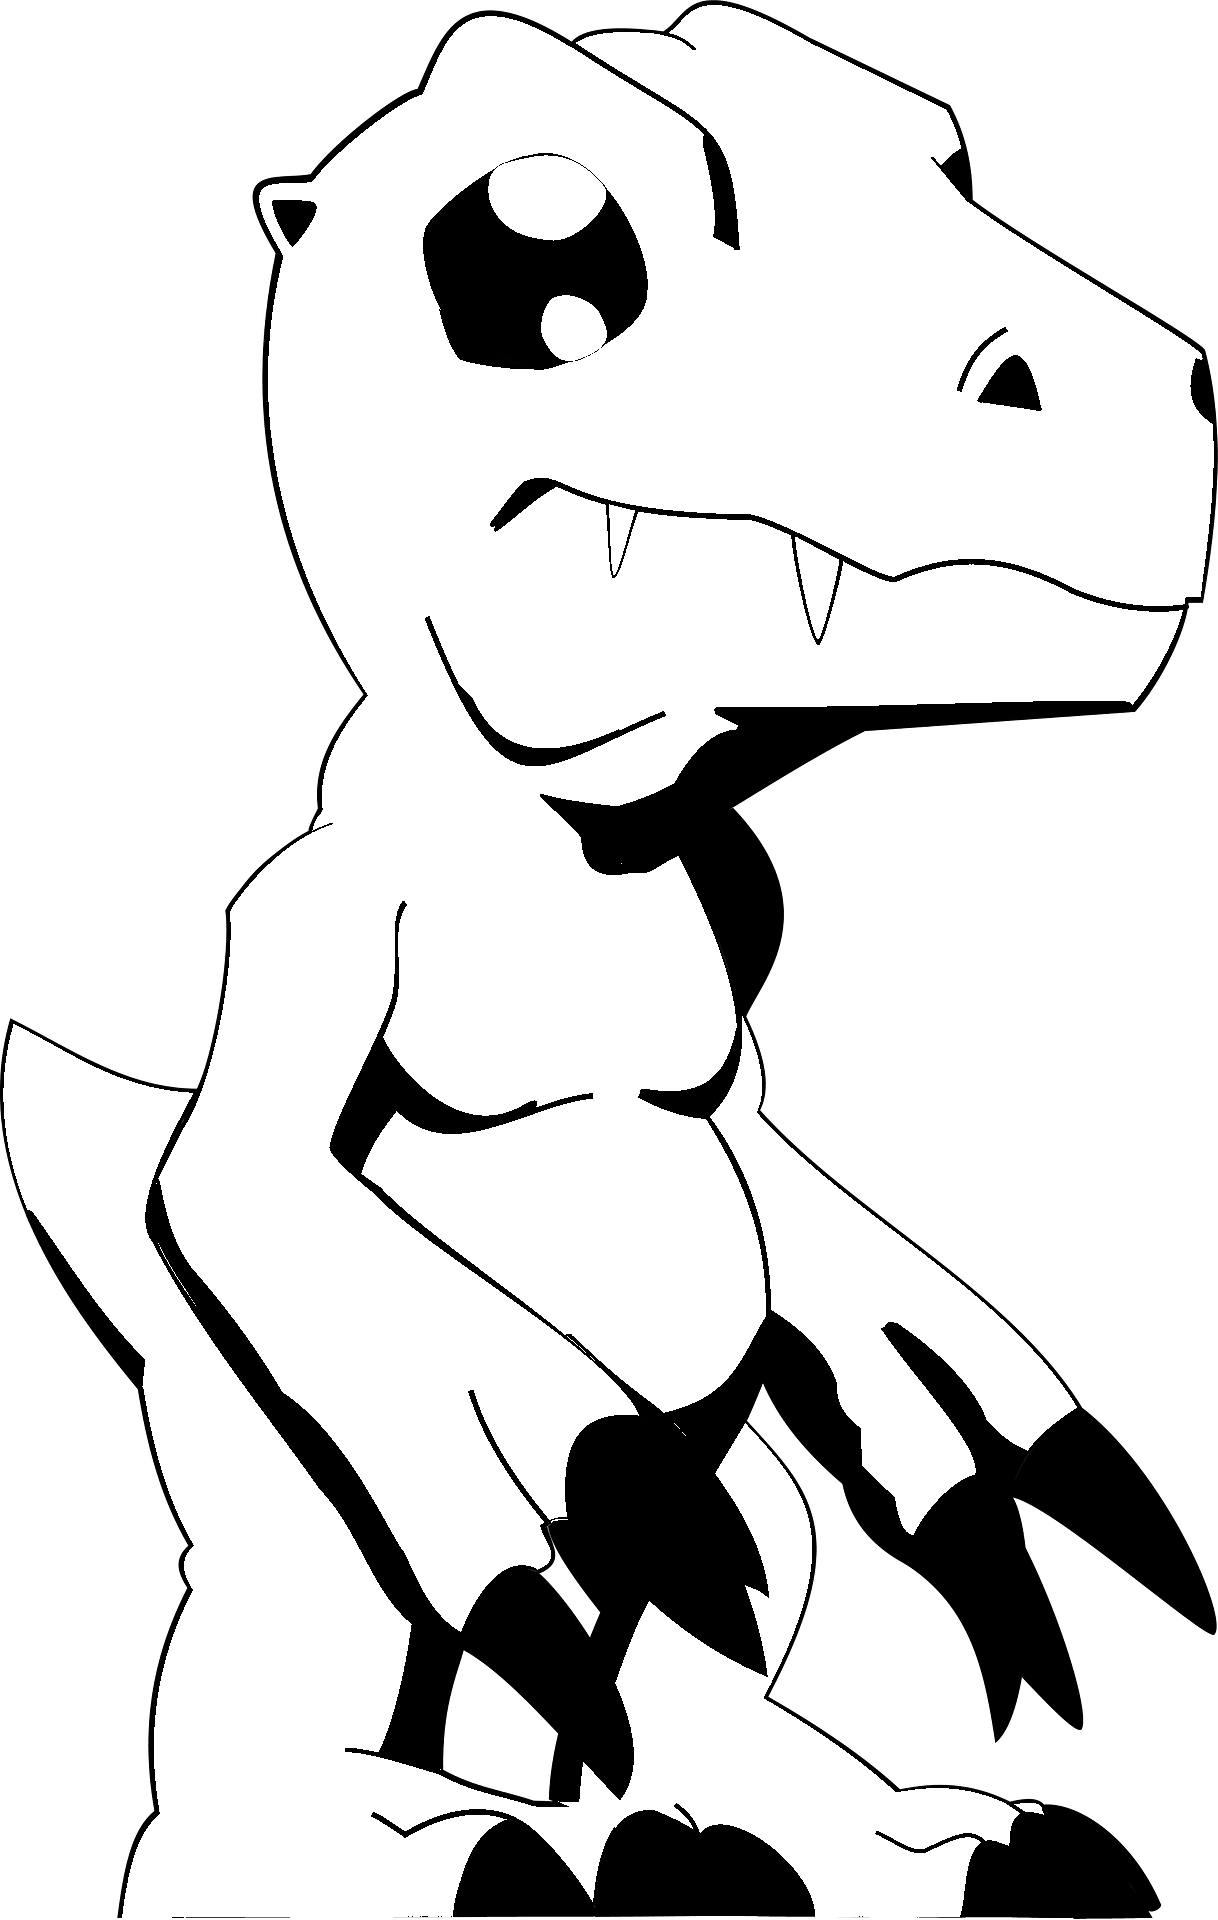 Coloring page of a lizard